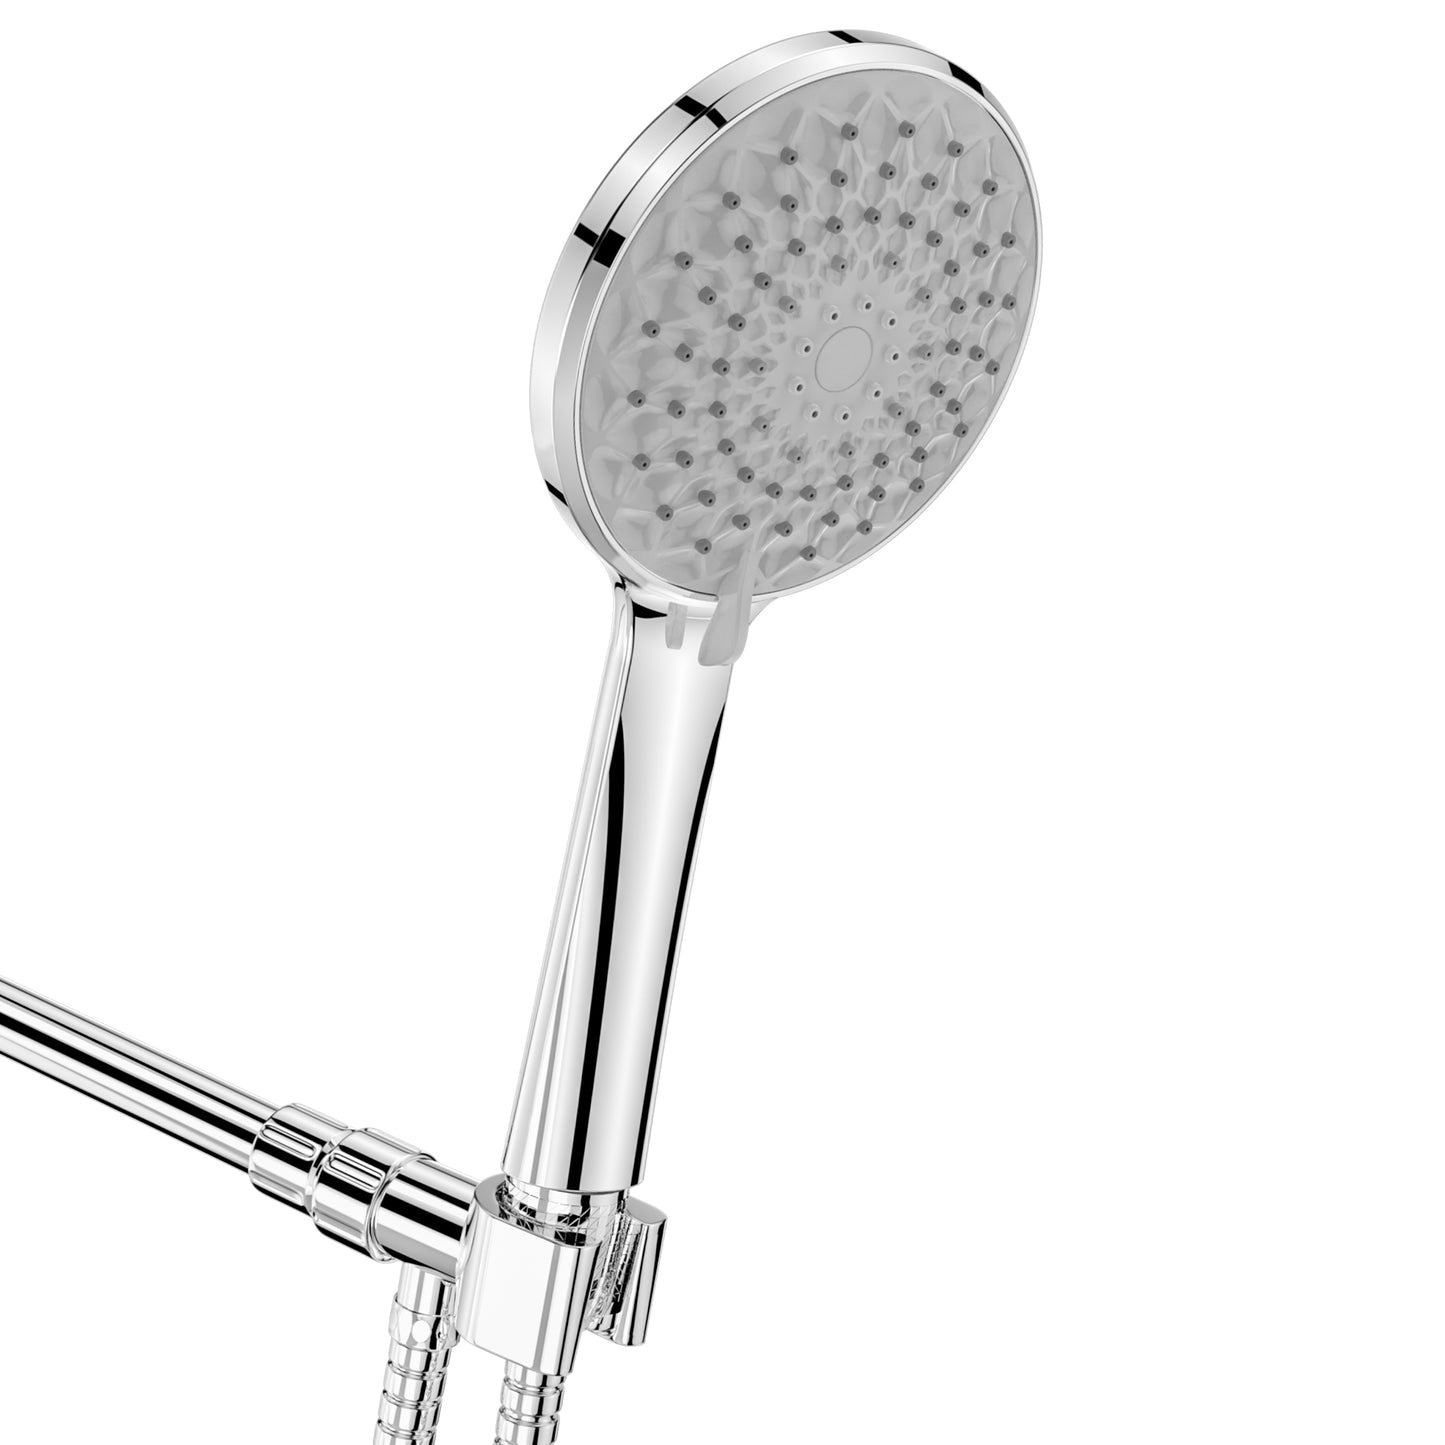 Lafati Handheld Shower Head Set with 6-Mode 60" Hose - Easy Install, Water-Saving Detachable Rain Shower for Ultimate Bathing Experience